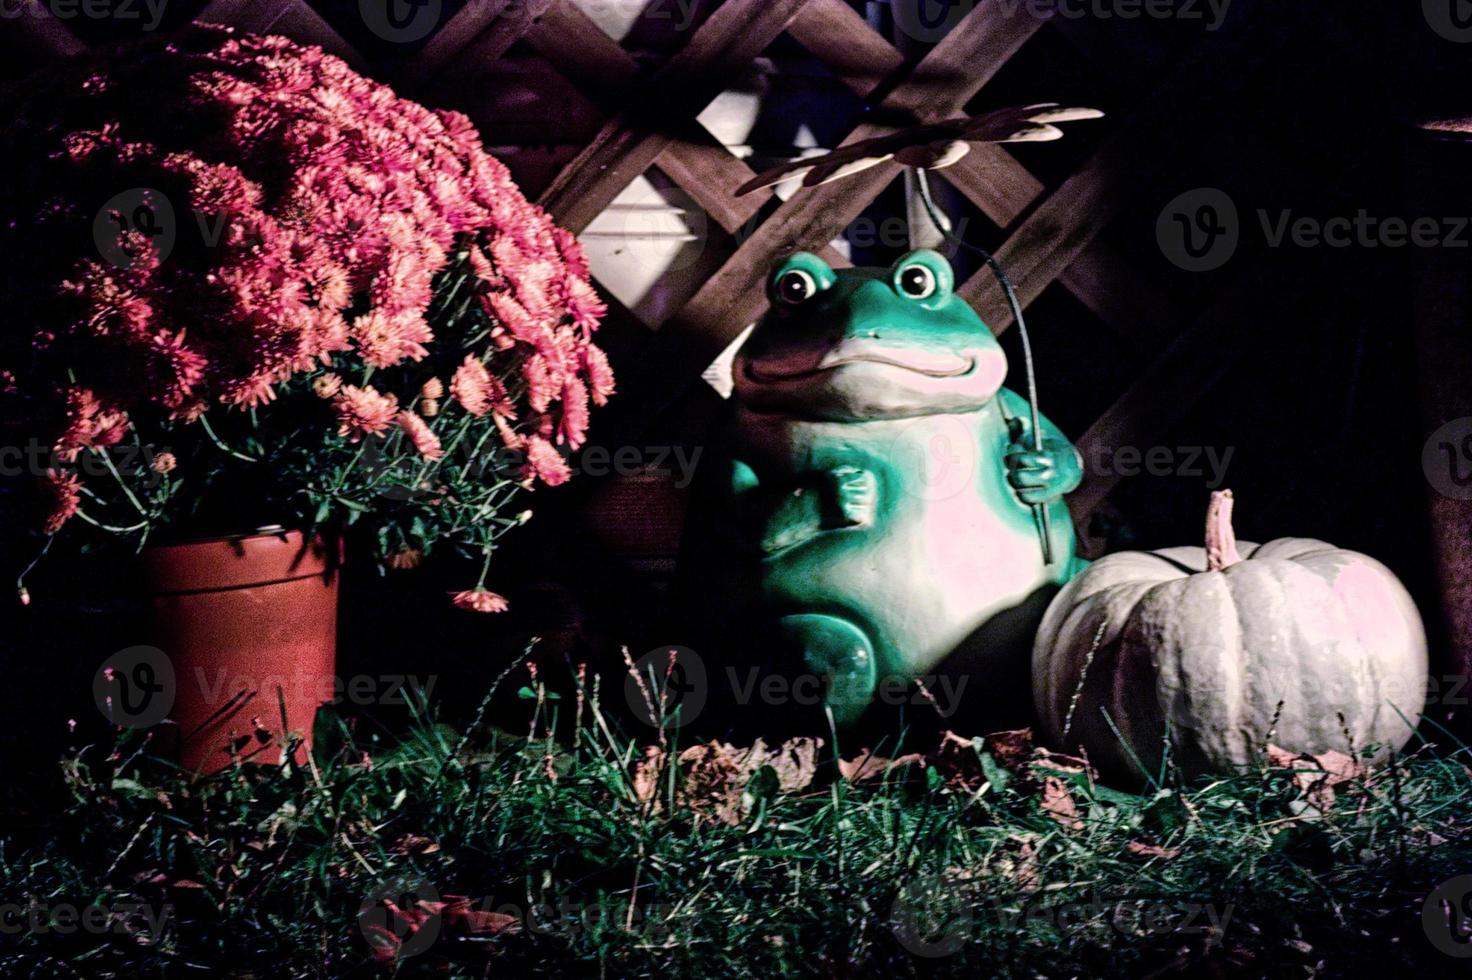 Frog statuette and pumpkin photo